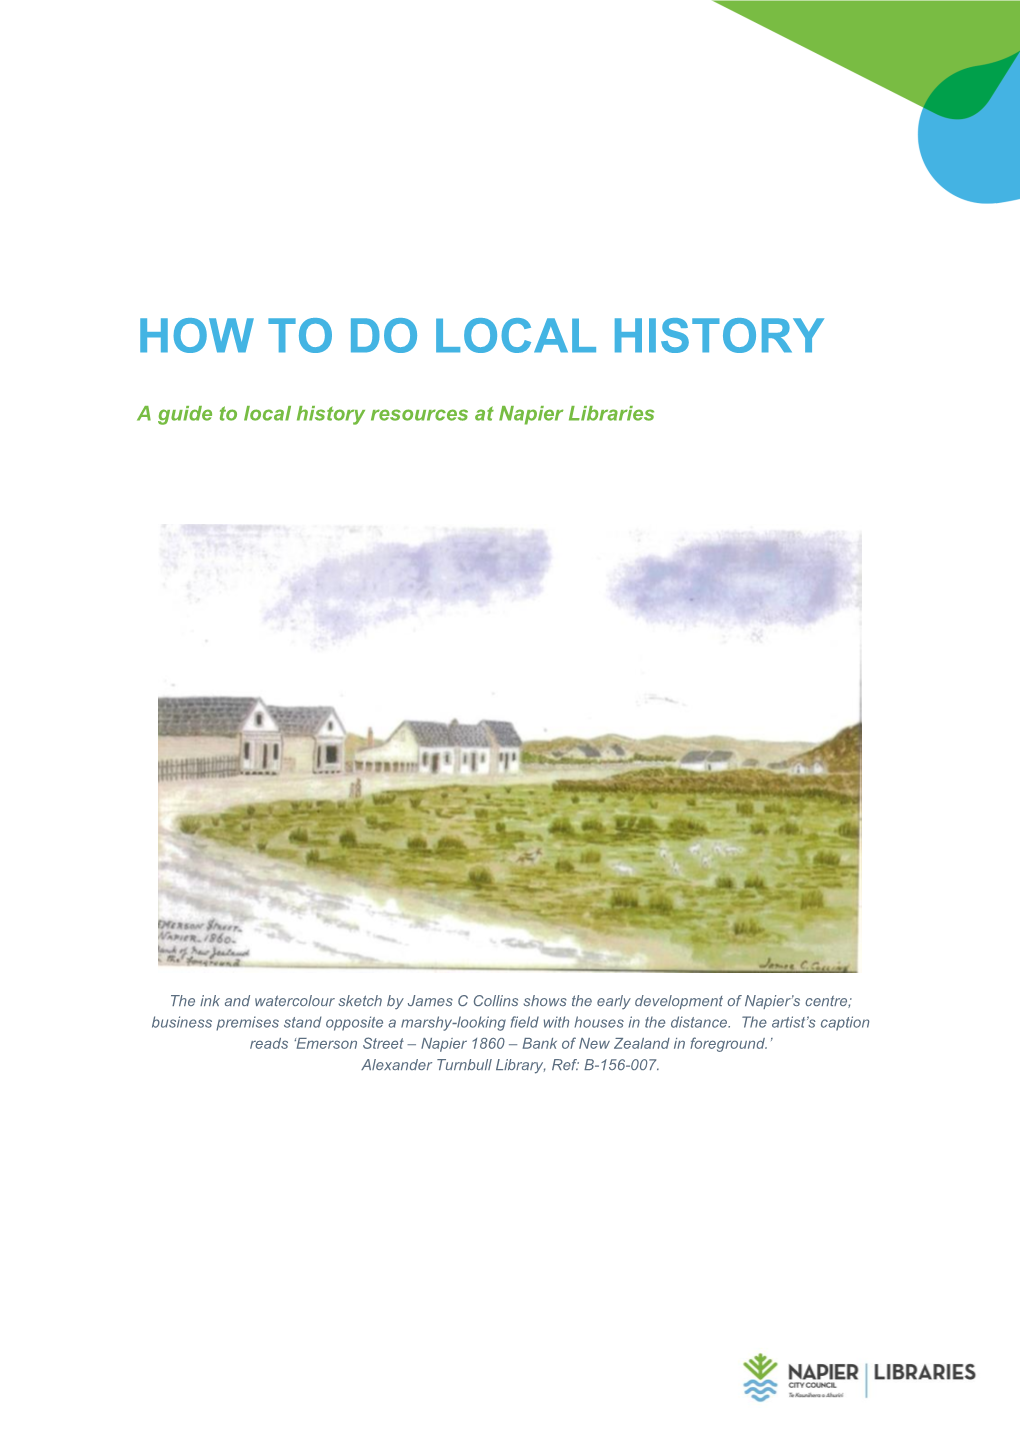 How to Do Local History